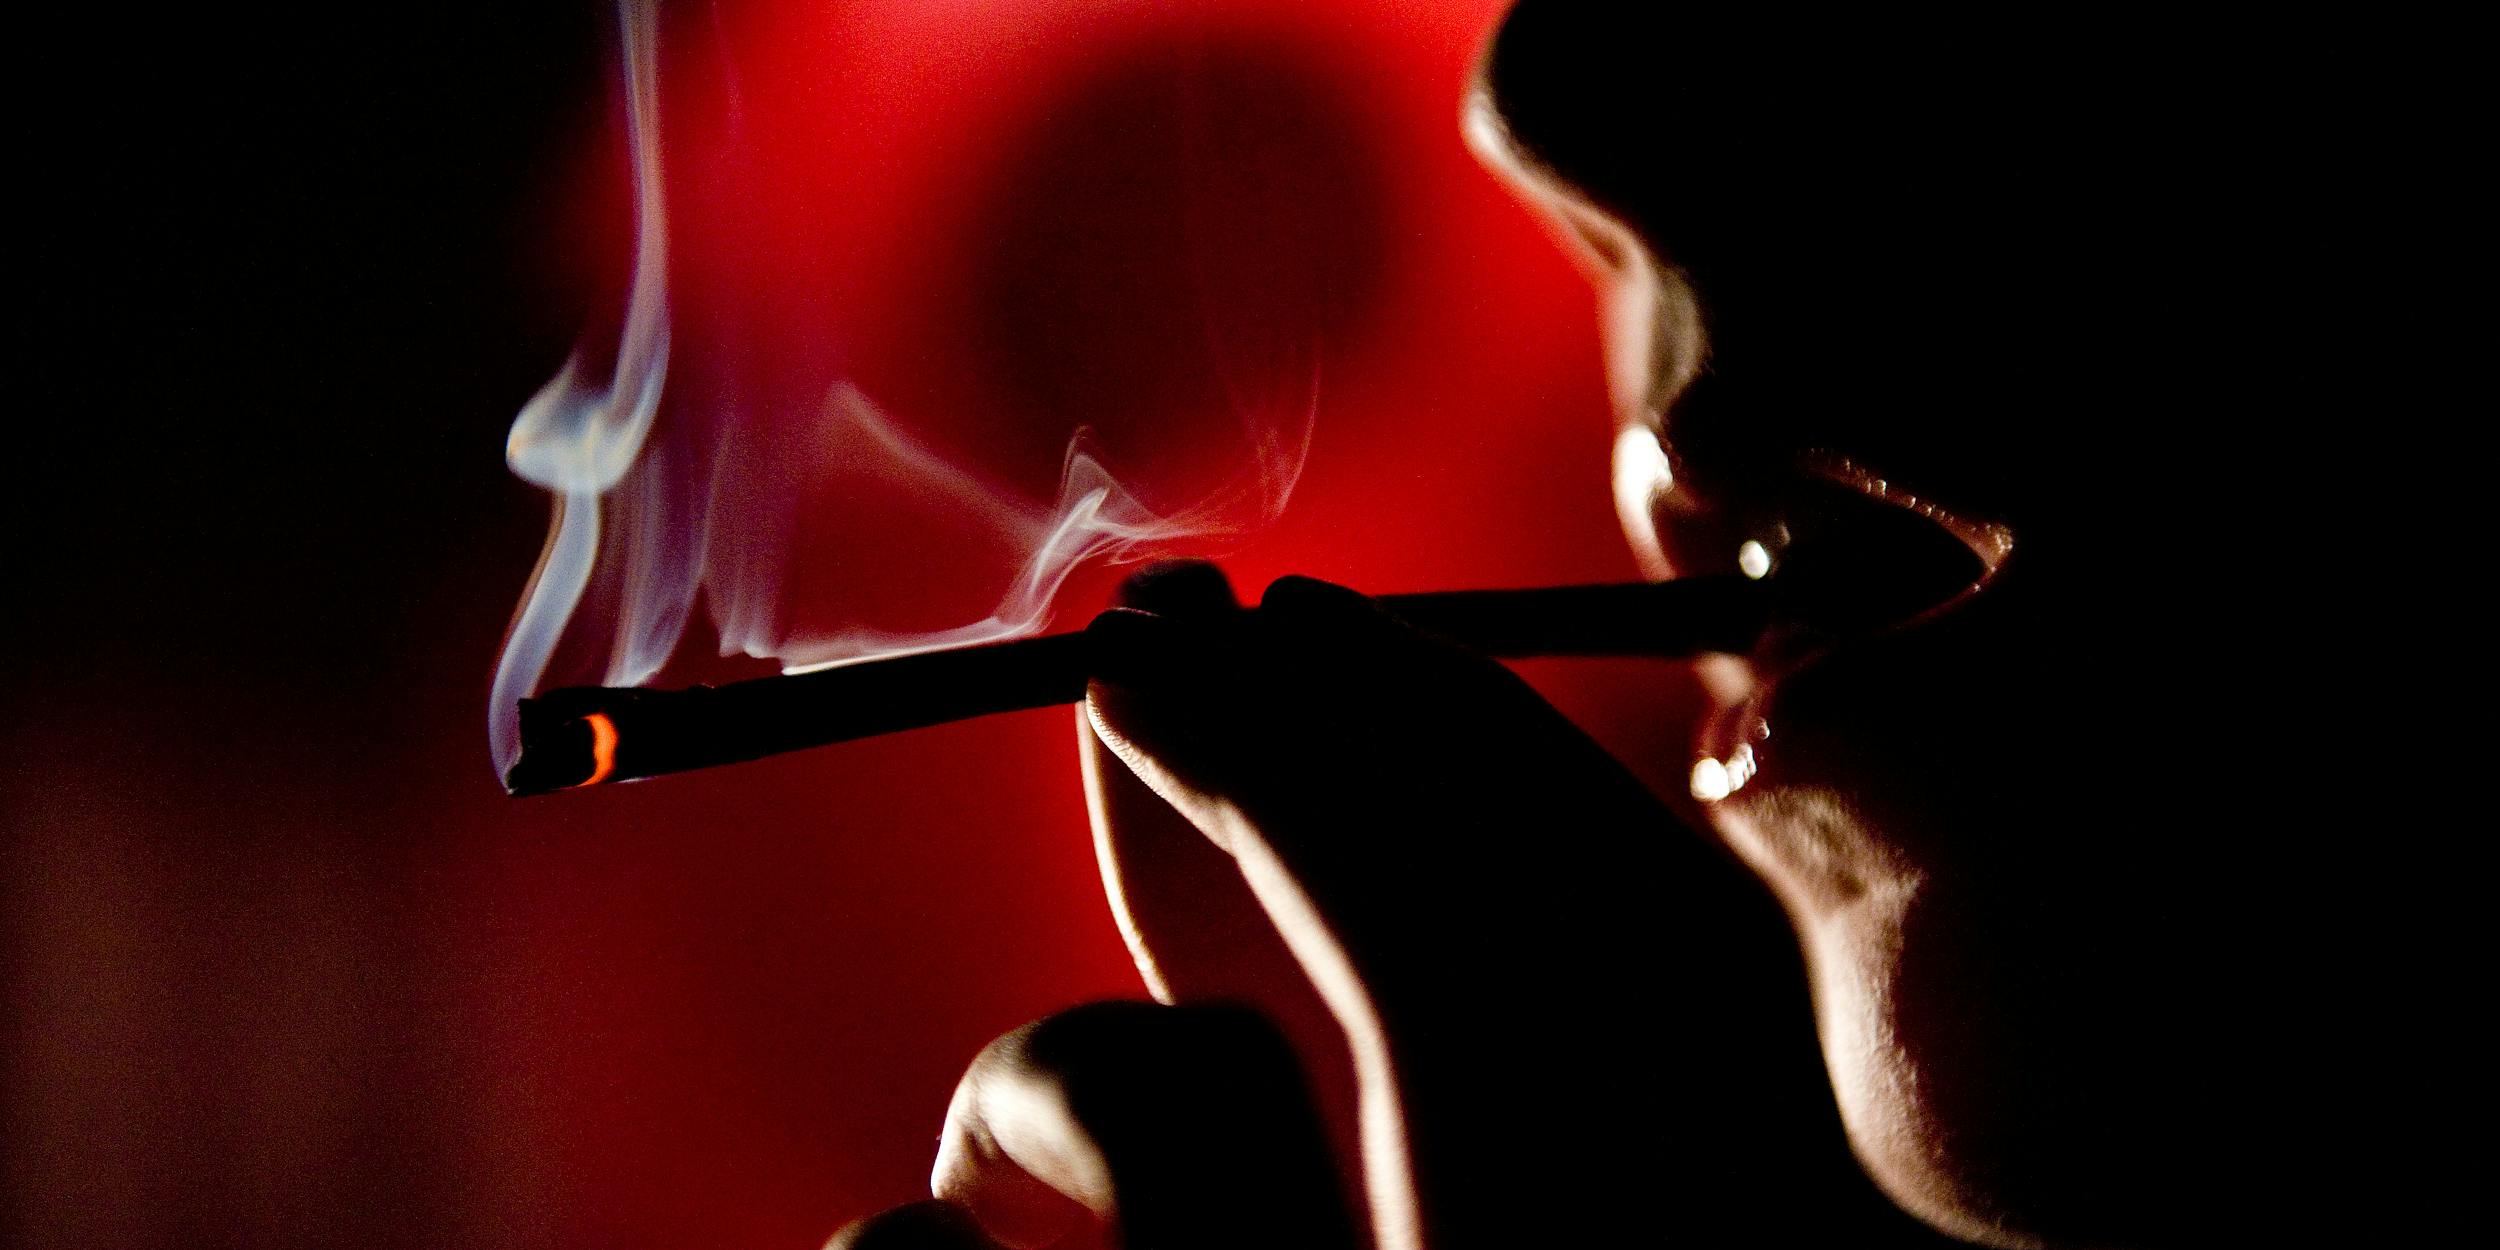 San Francisco Becomes America's Weed Capital With High-End Smoking Lounges